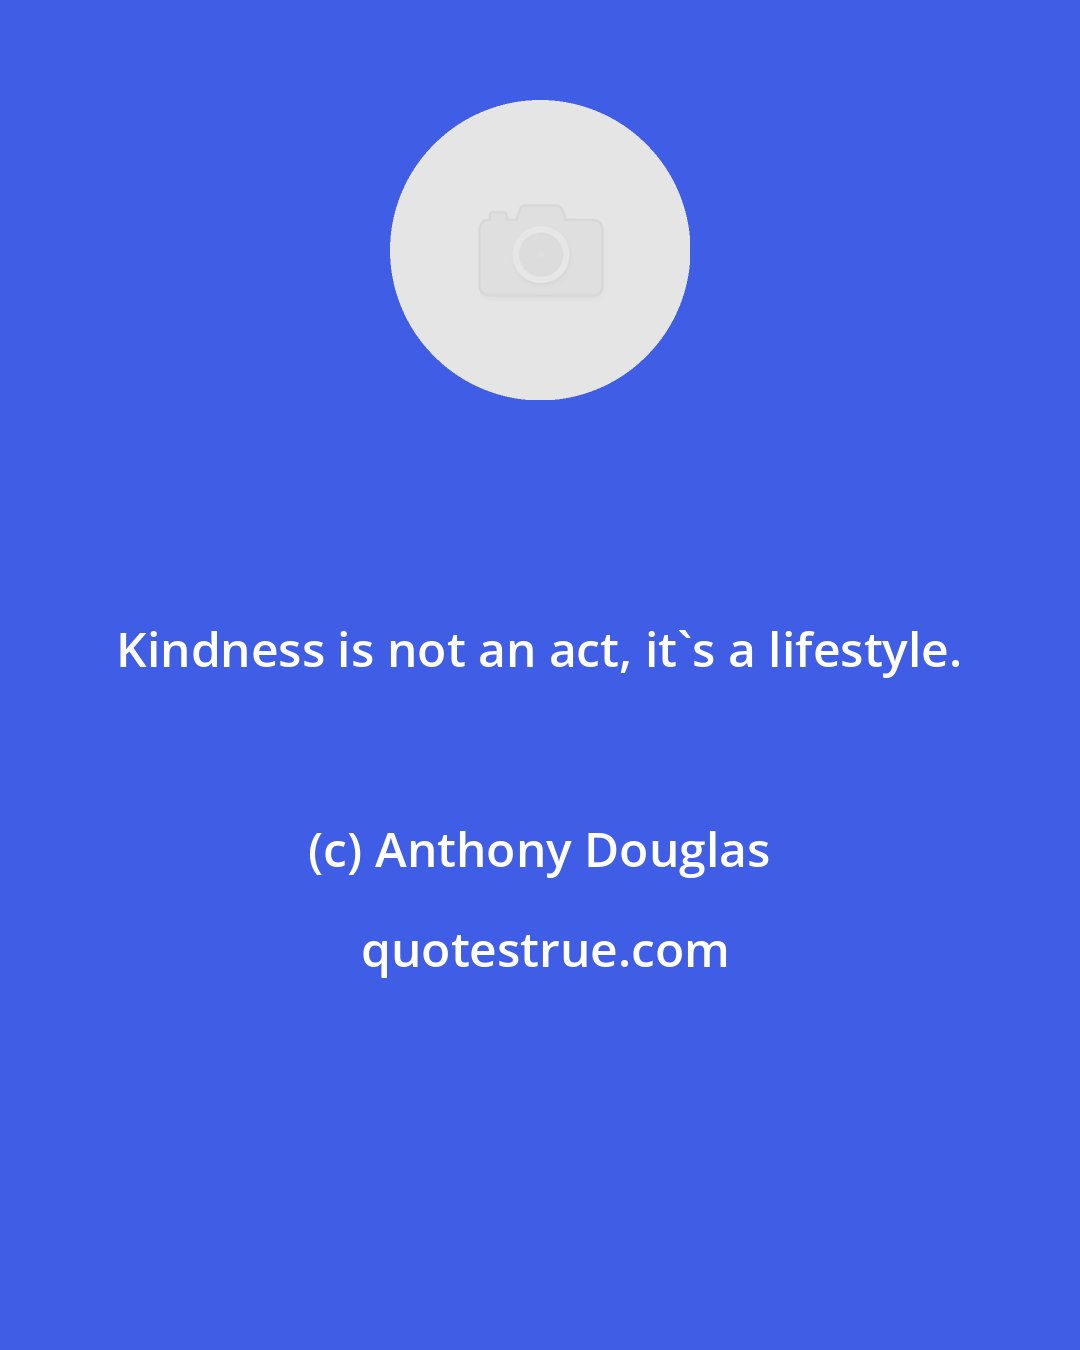 Anthony Douglas: Kindness is not an act, it's a lifestyle.